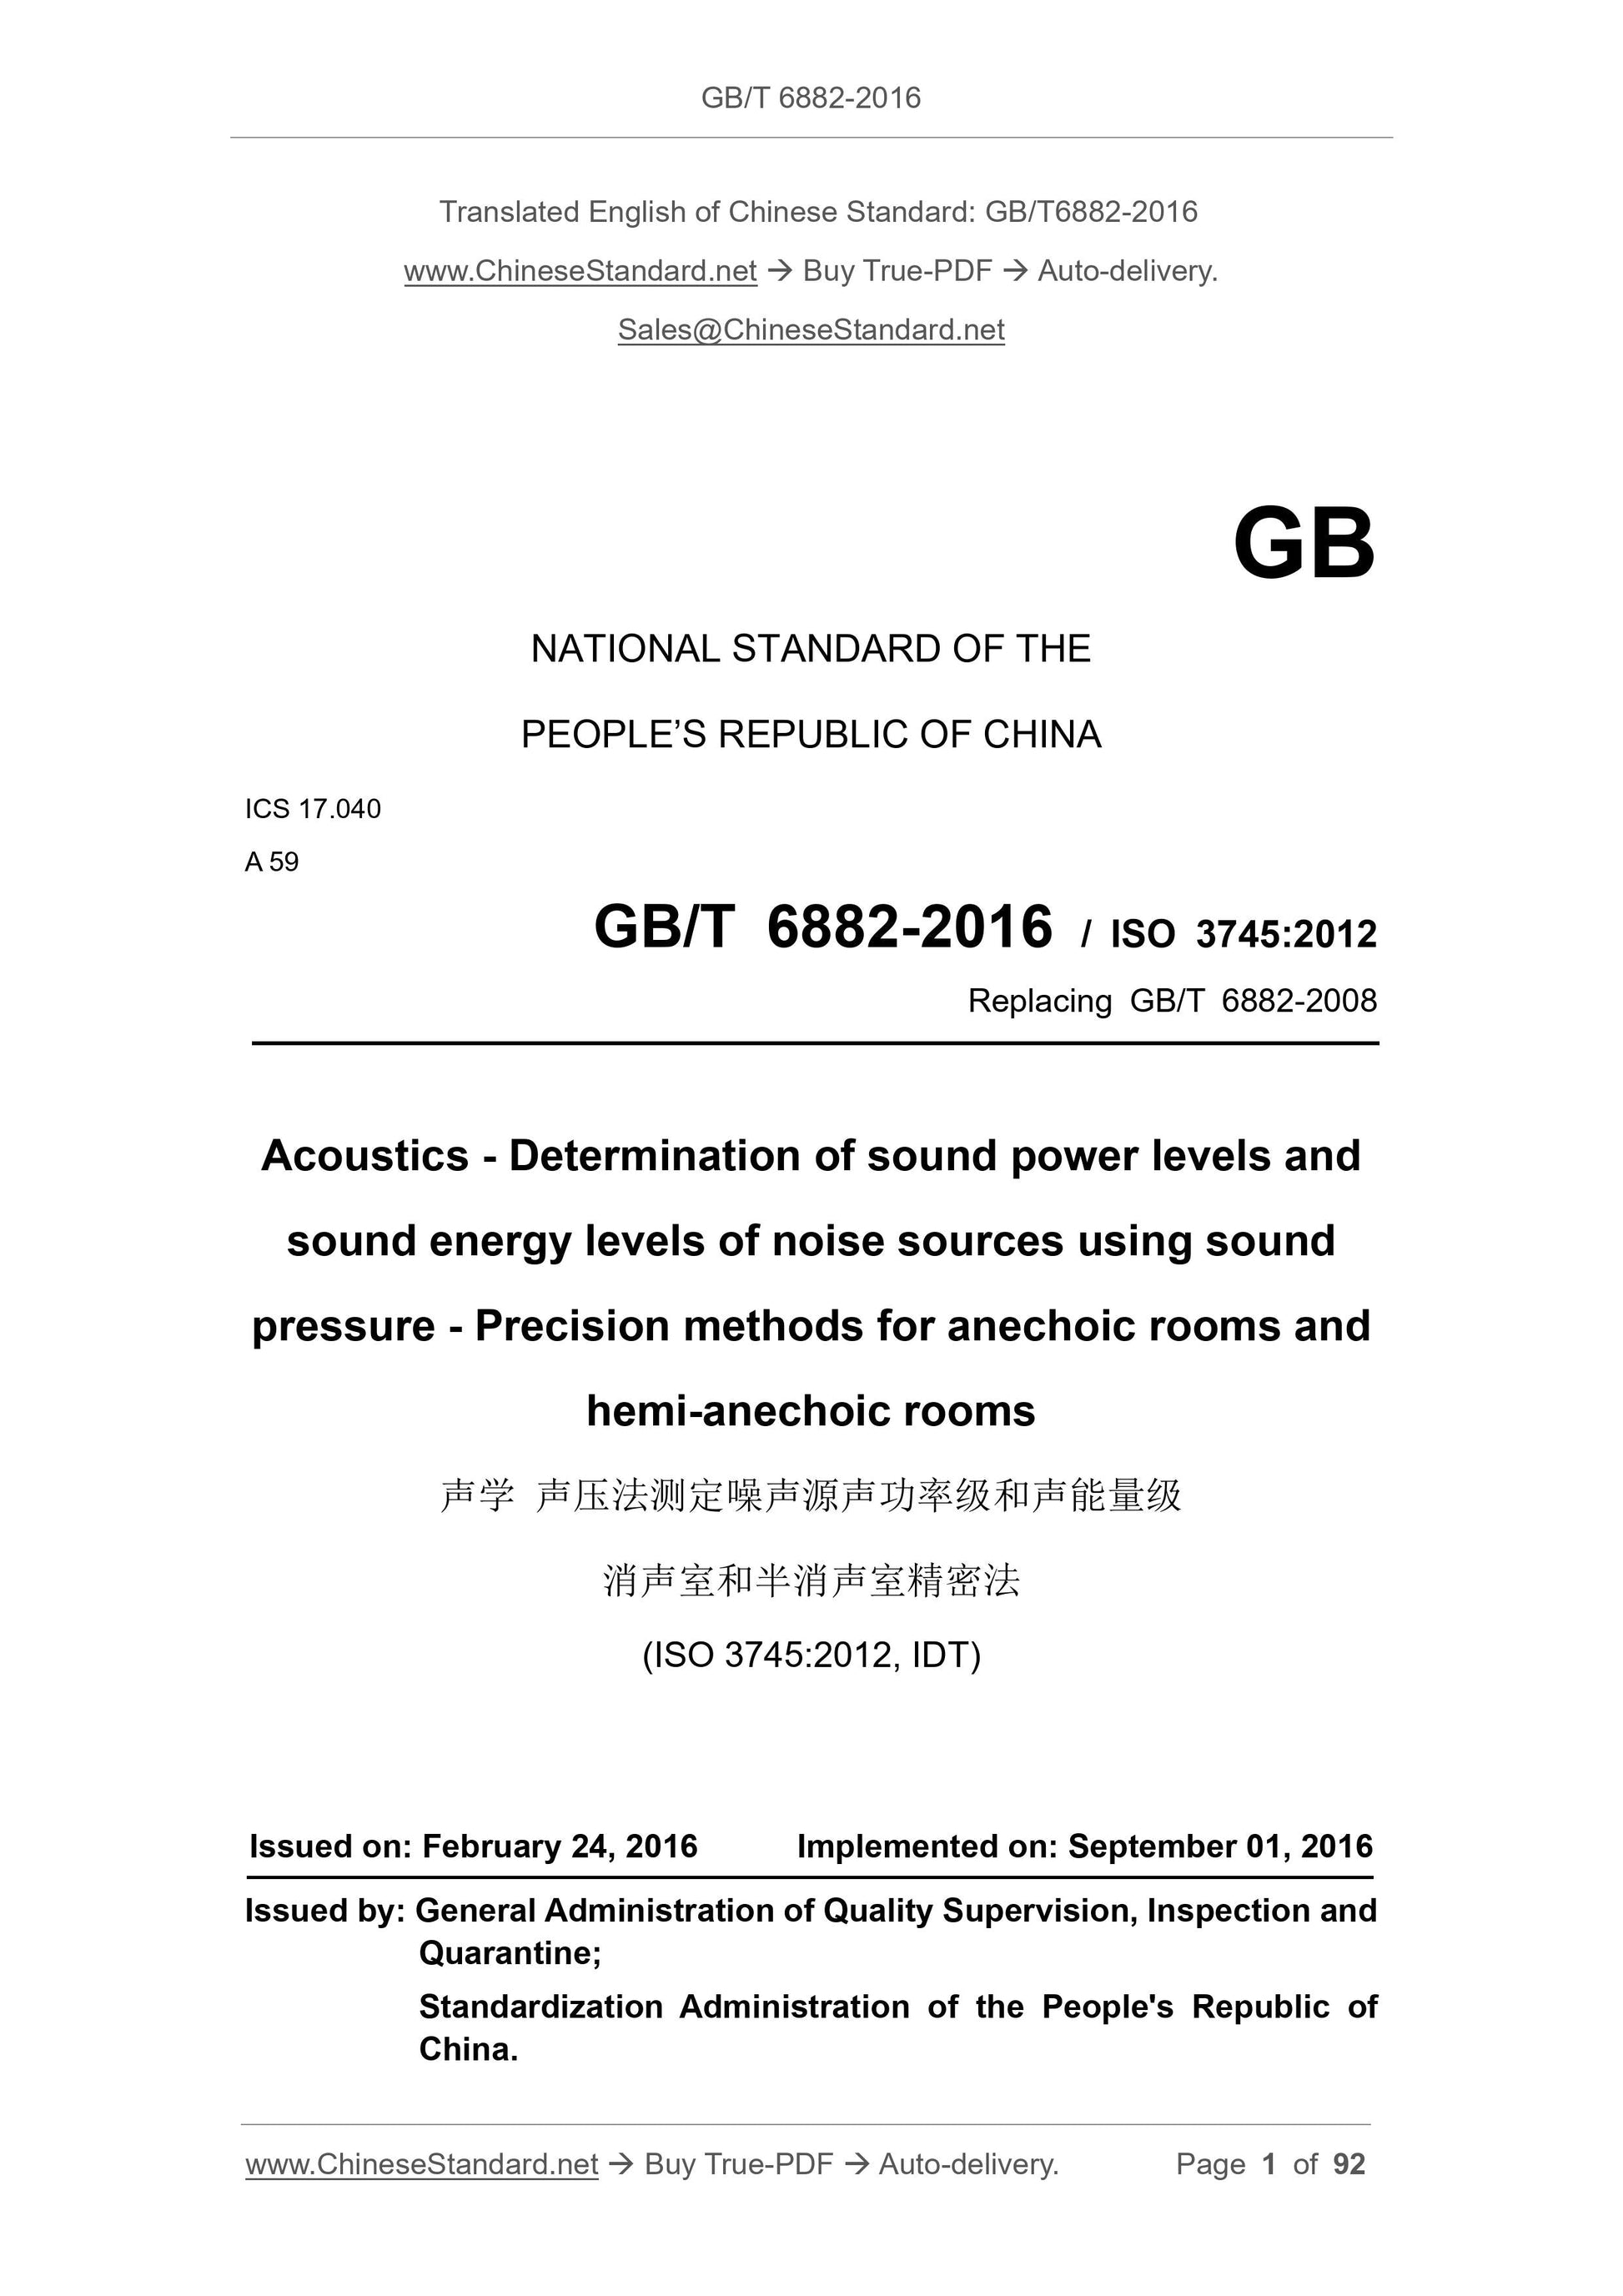 GB/T 6882-2016 Page 1